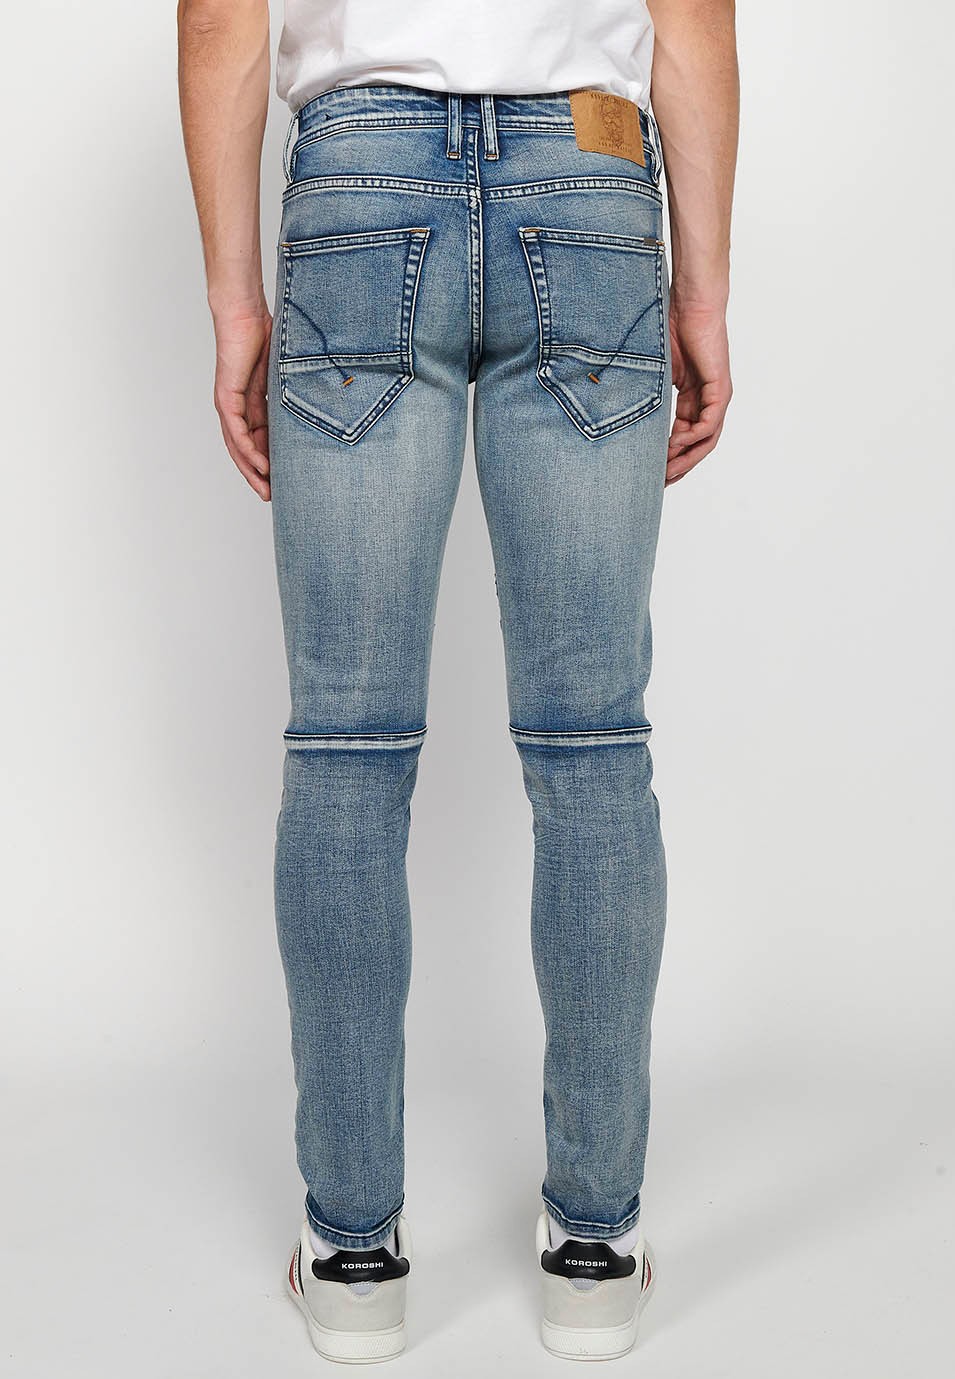 Long skinny fit biker jeans with front zipper and button closure and cut details on the knees in Blue for Men 4